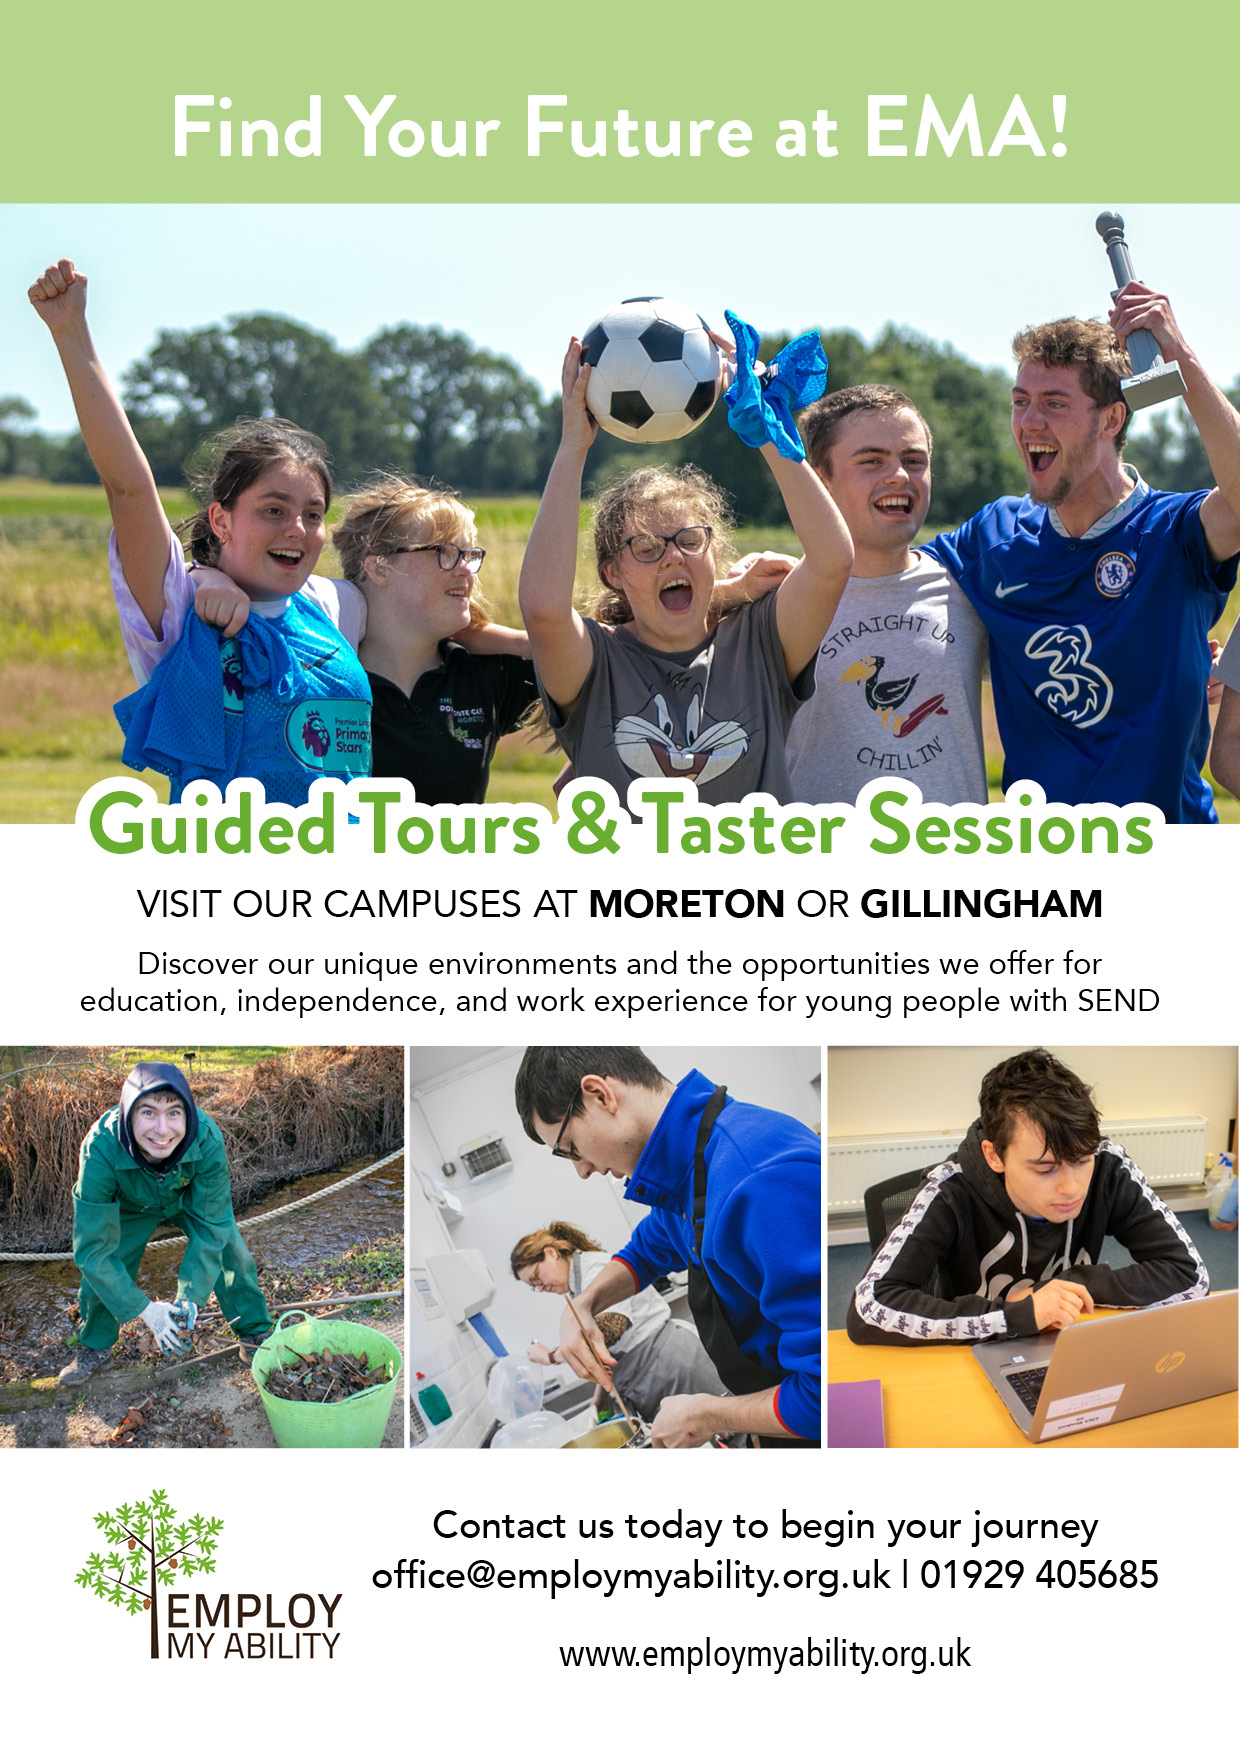 Tours and Taster Sessions